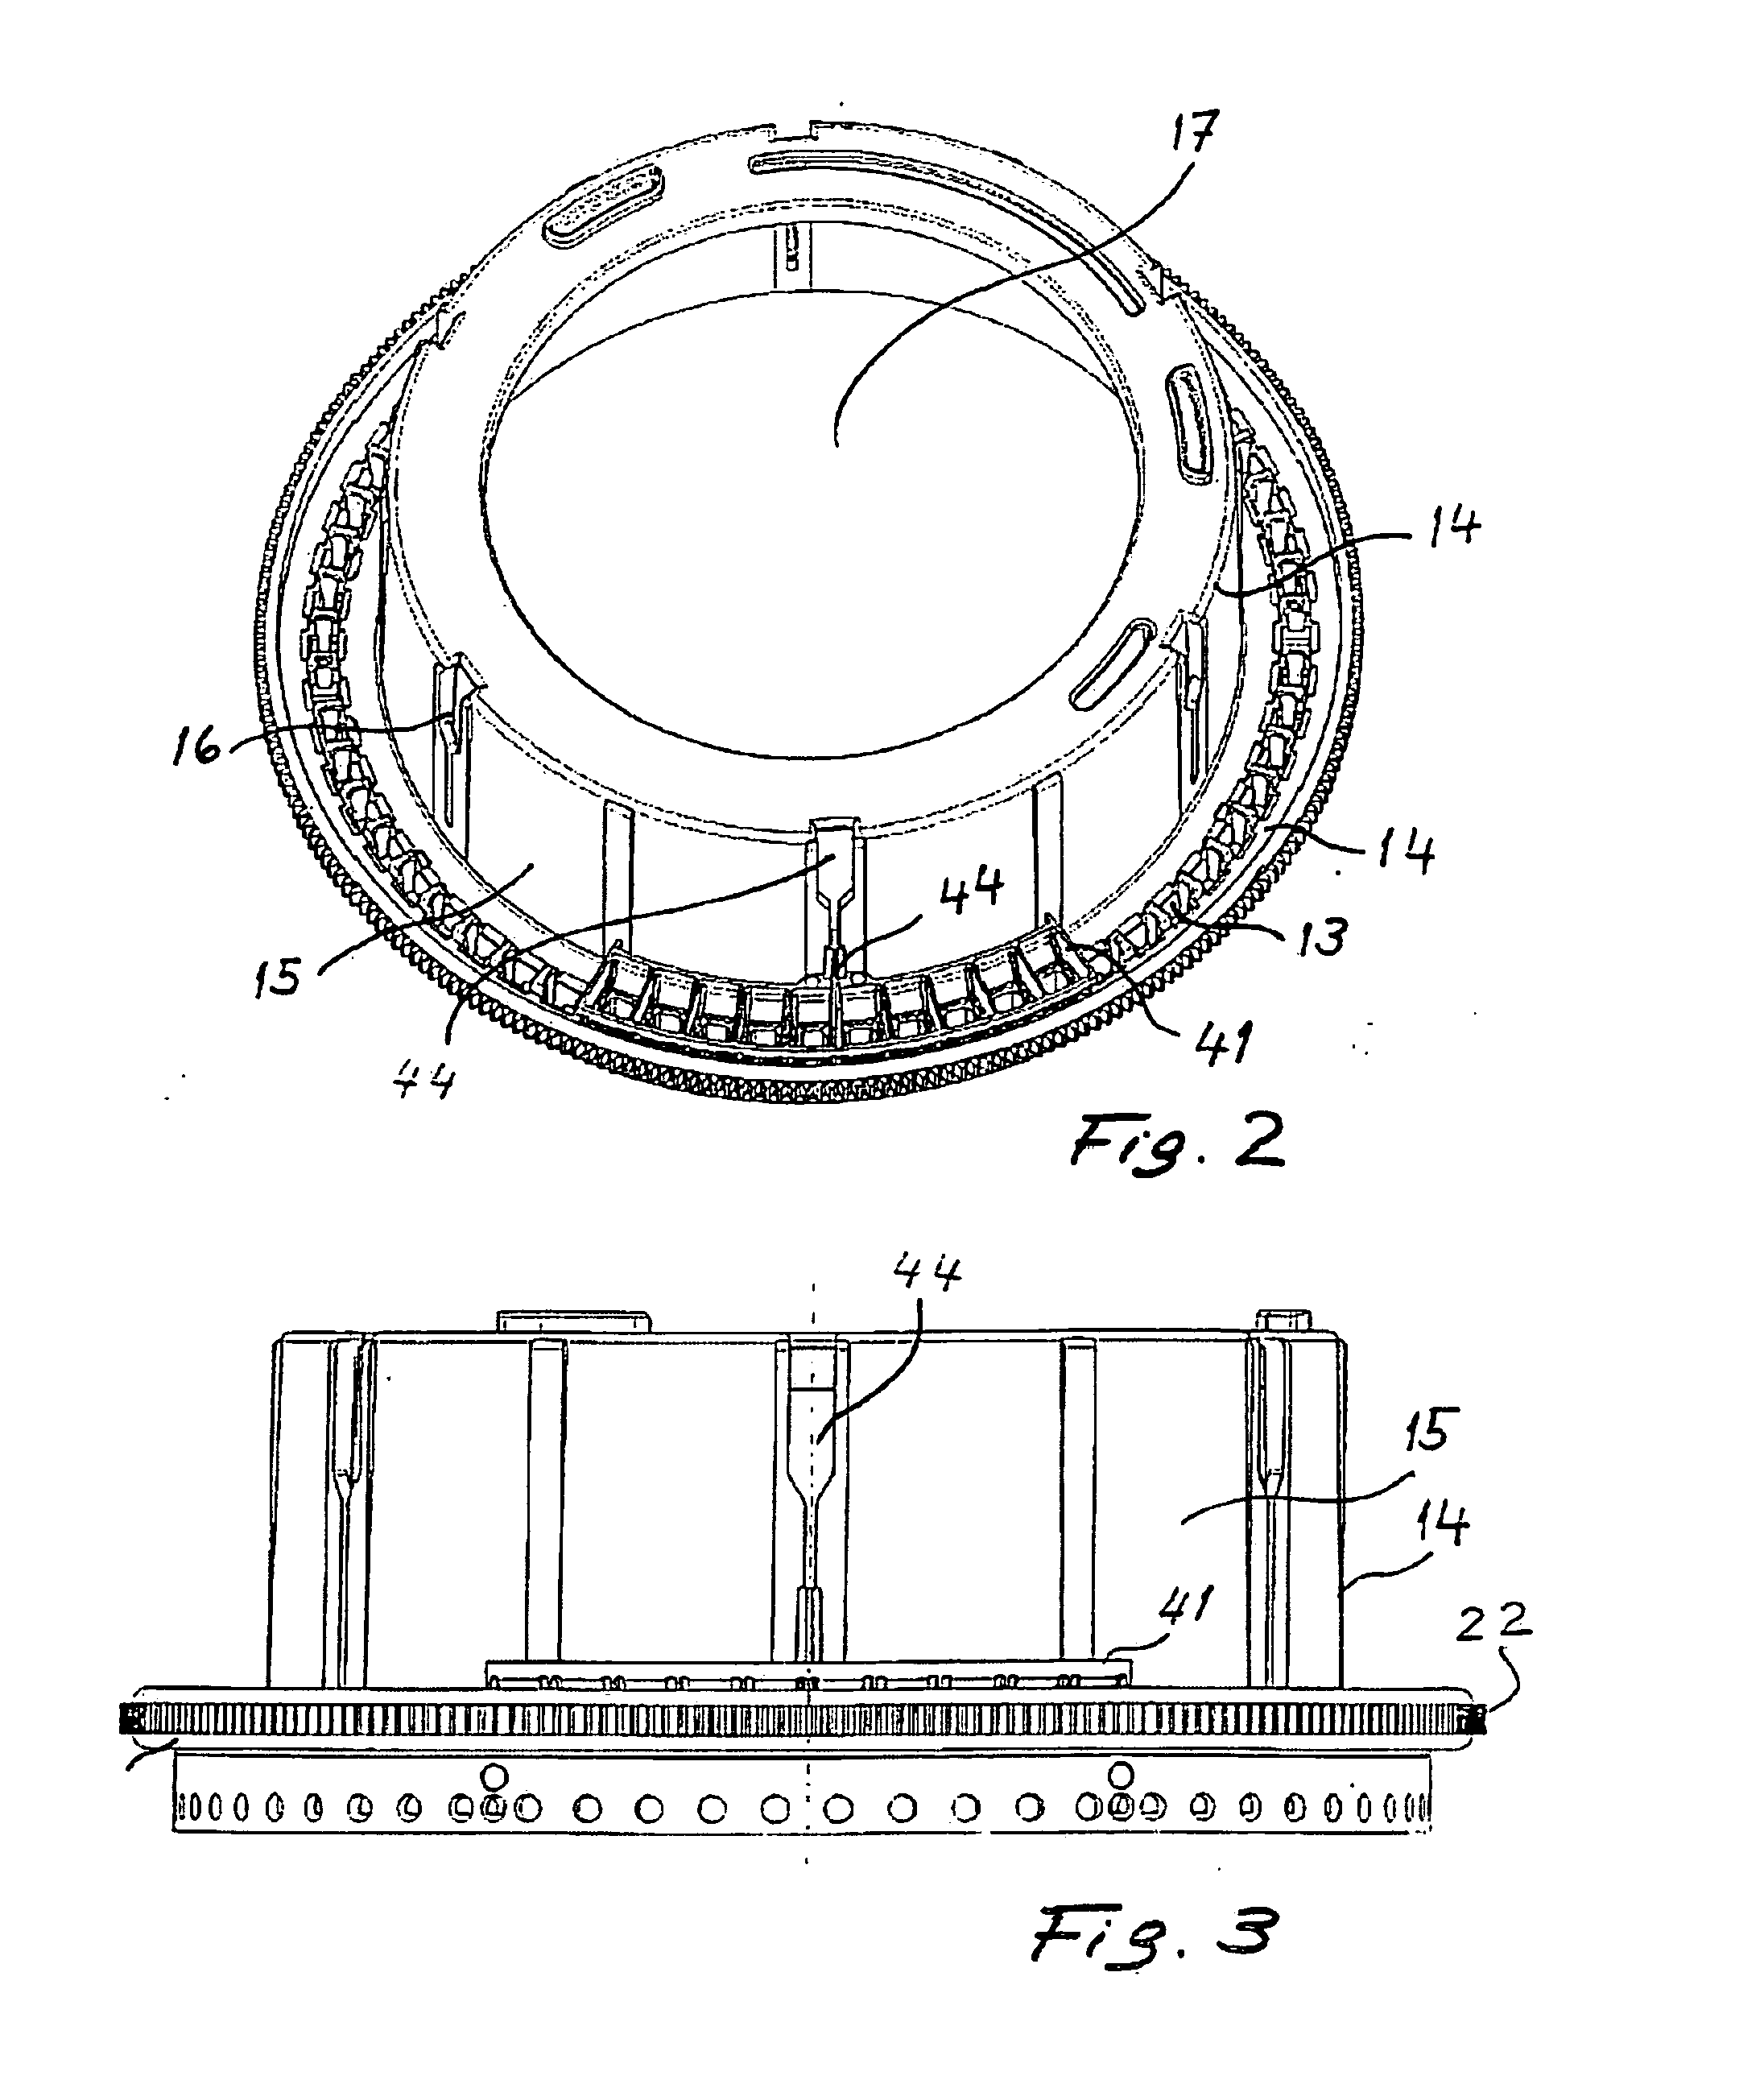 Method and apparatus for positioning a pipetting device